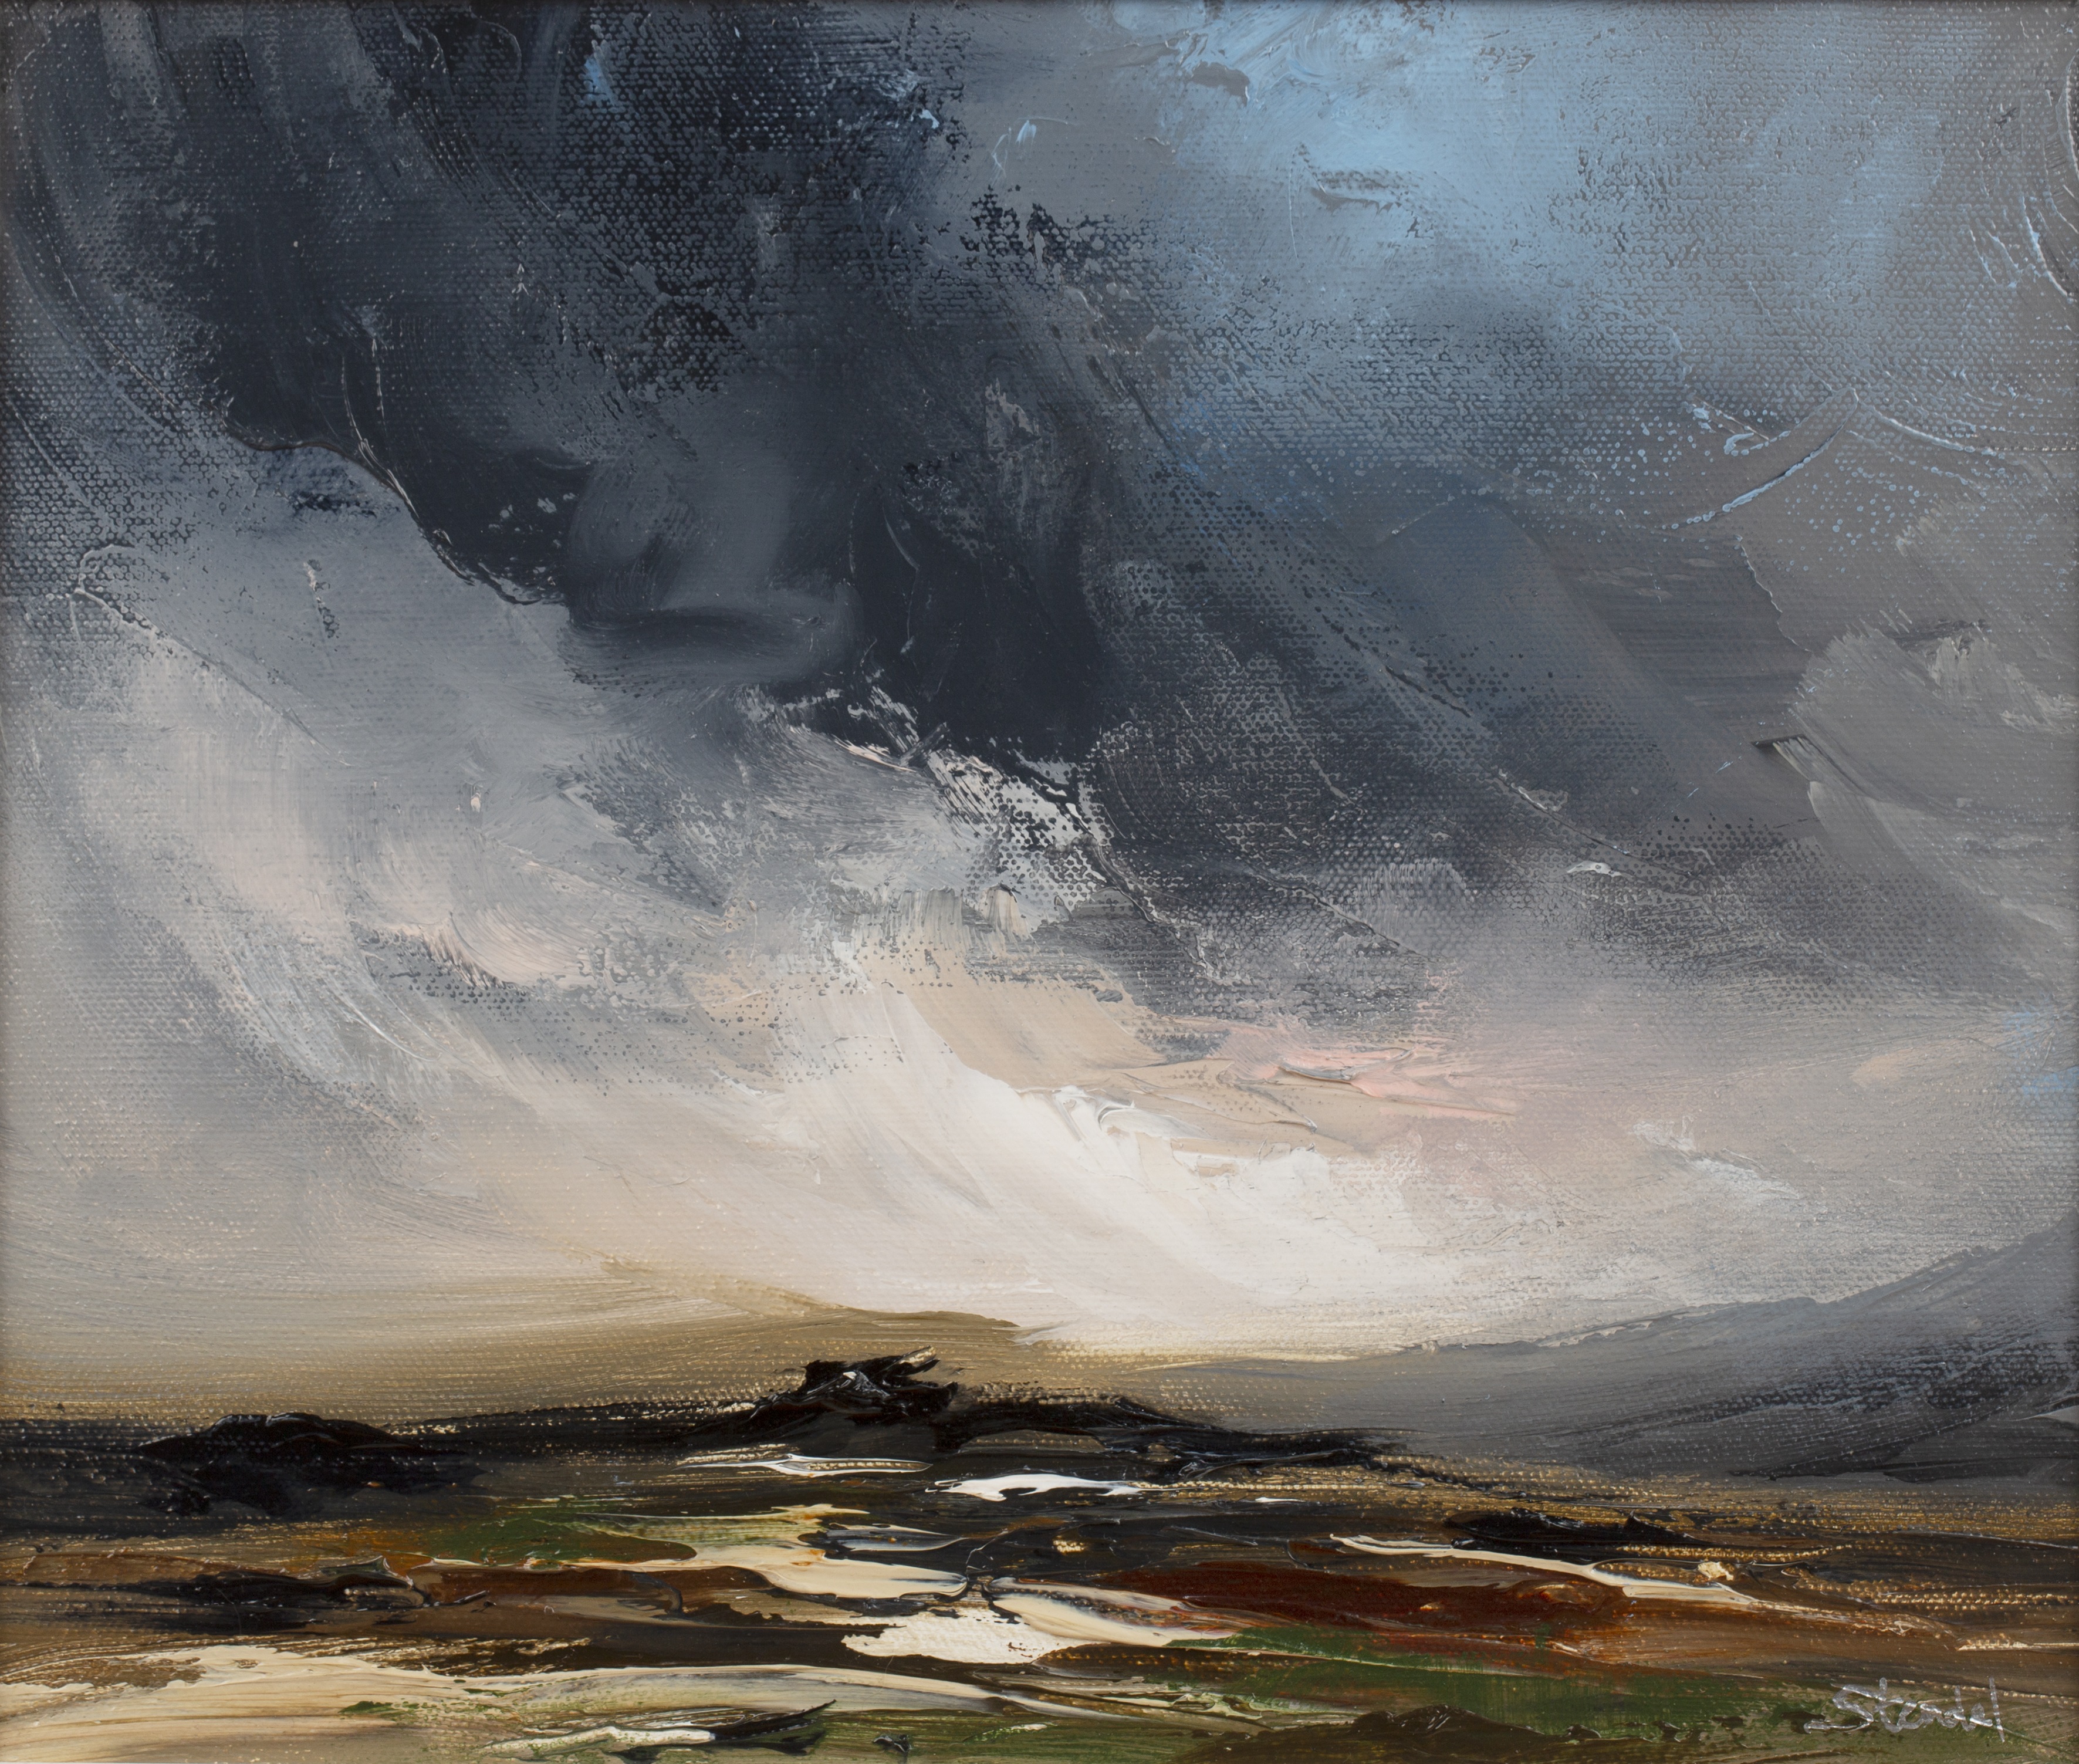 David Stendall (Contemporary) 'Northumberland landscape', oil on canvas, signed lower right, 25cm